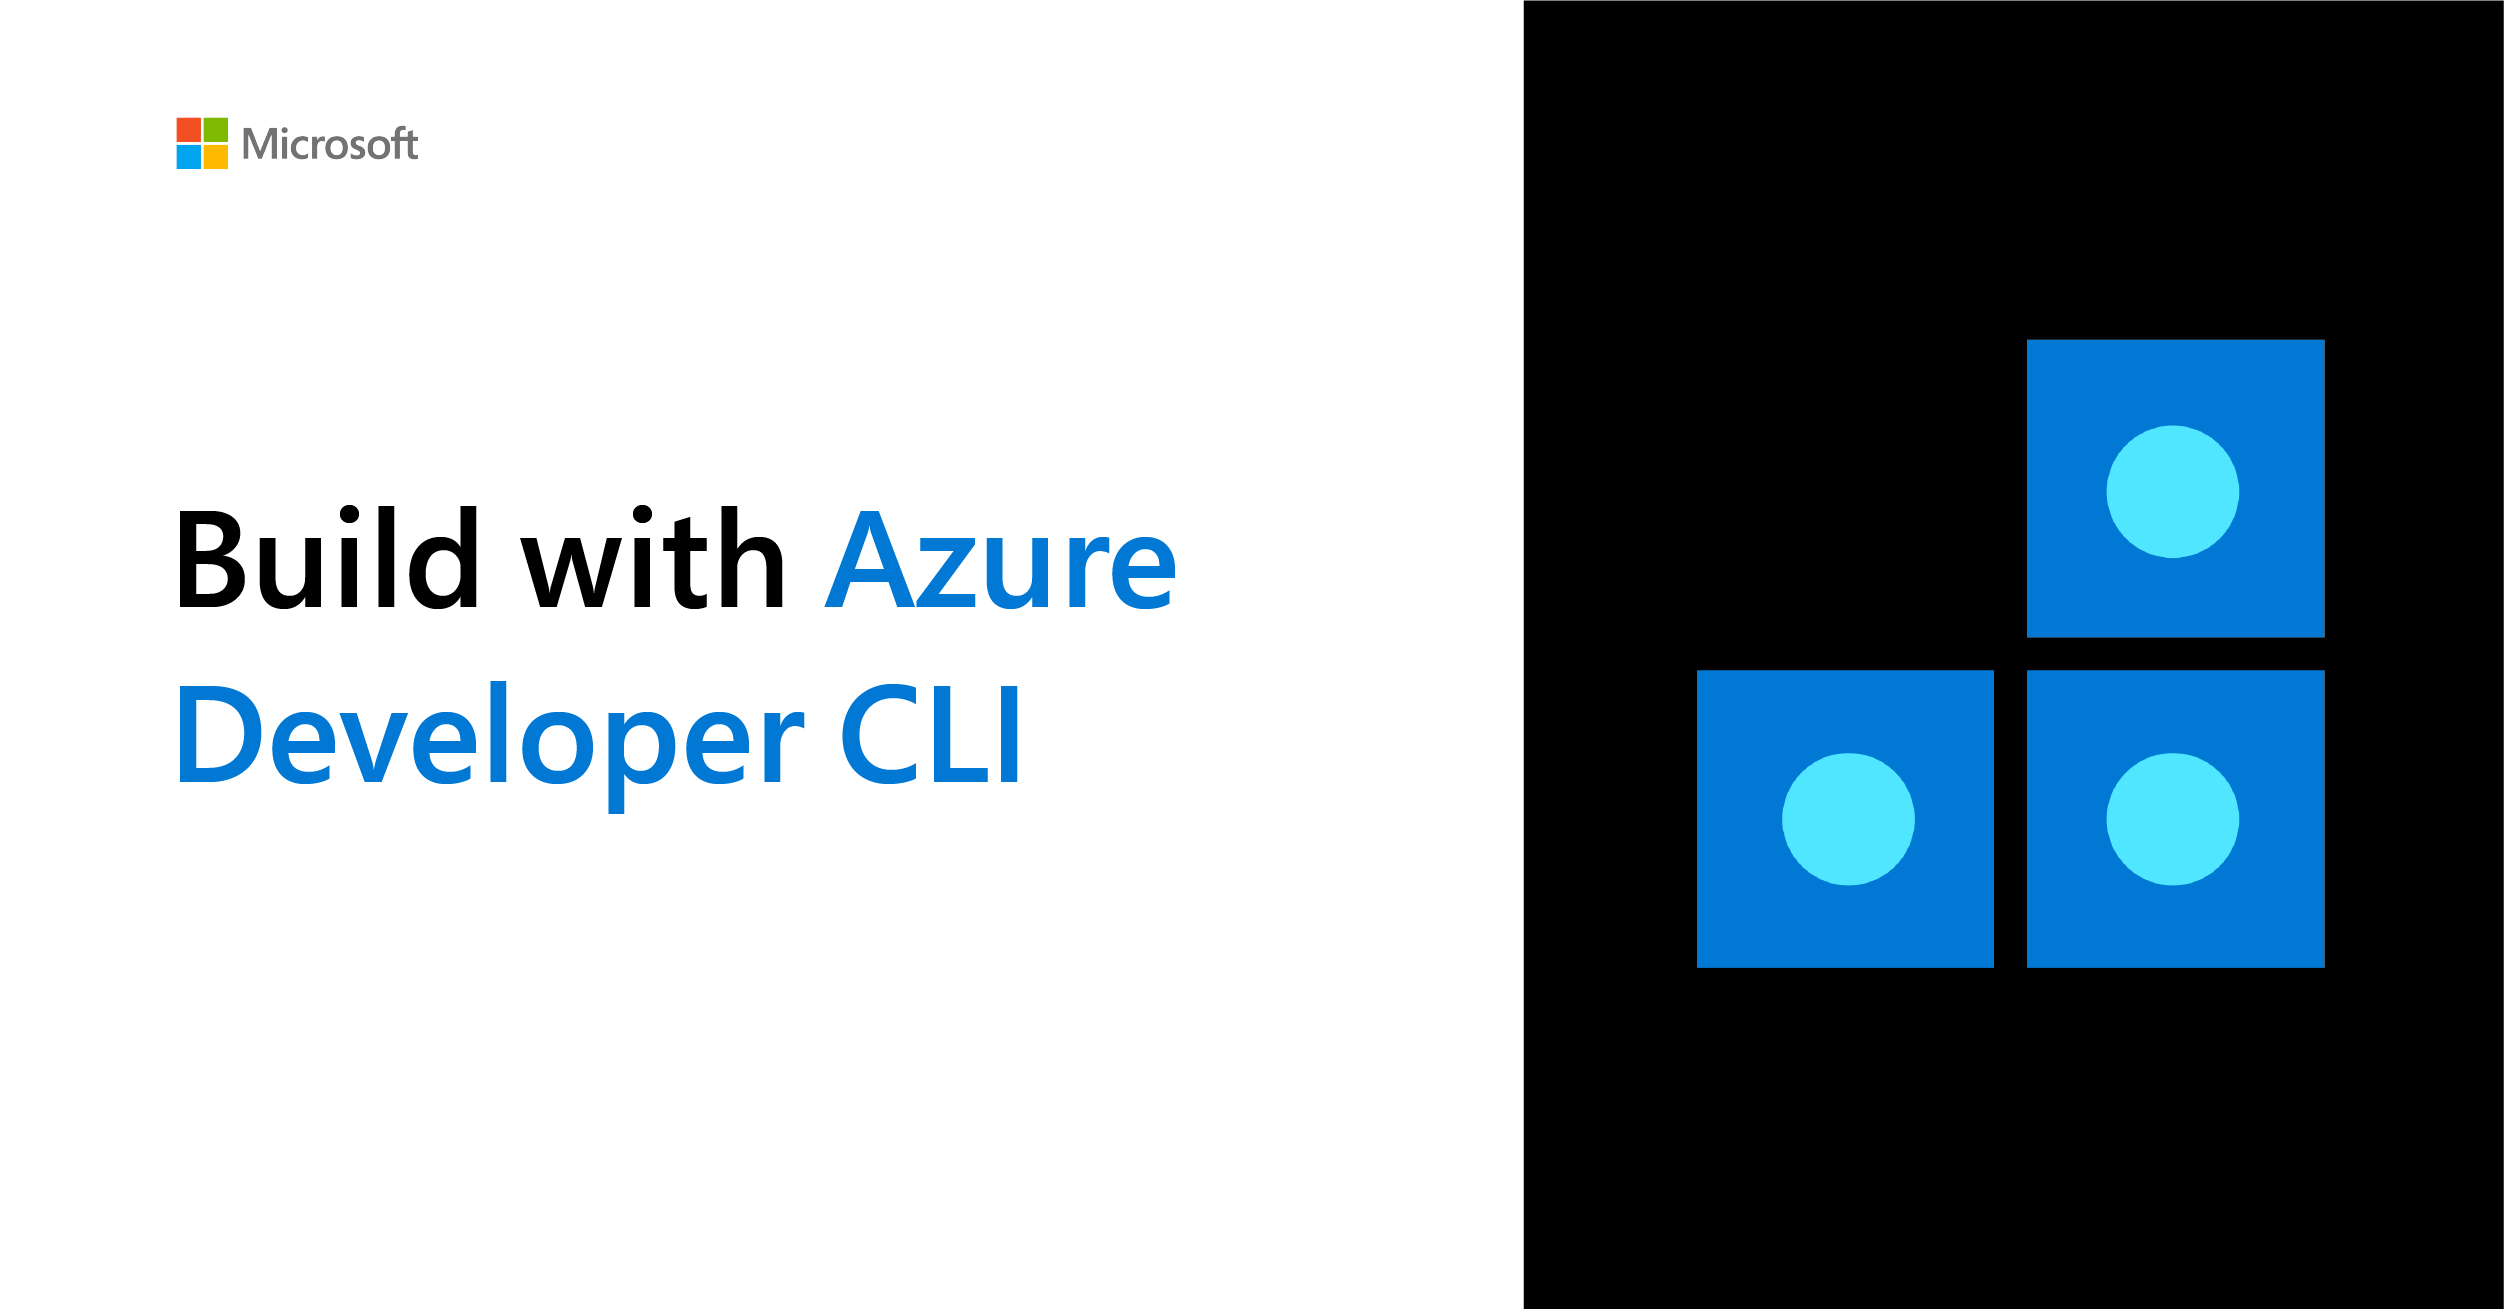 Introducing the Azure Developer CLI: A faster way to build apps for the cloud